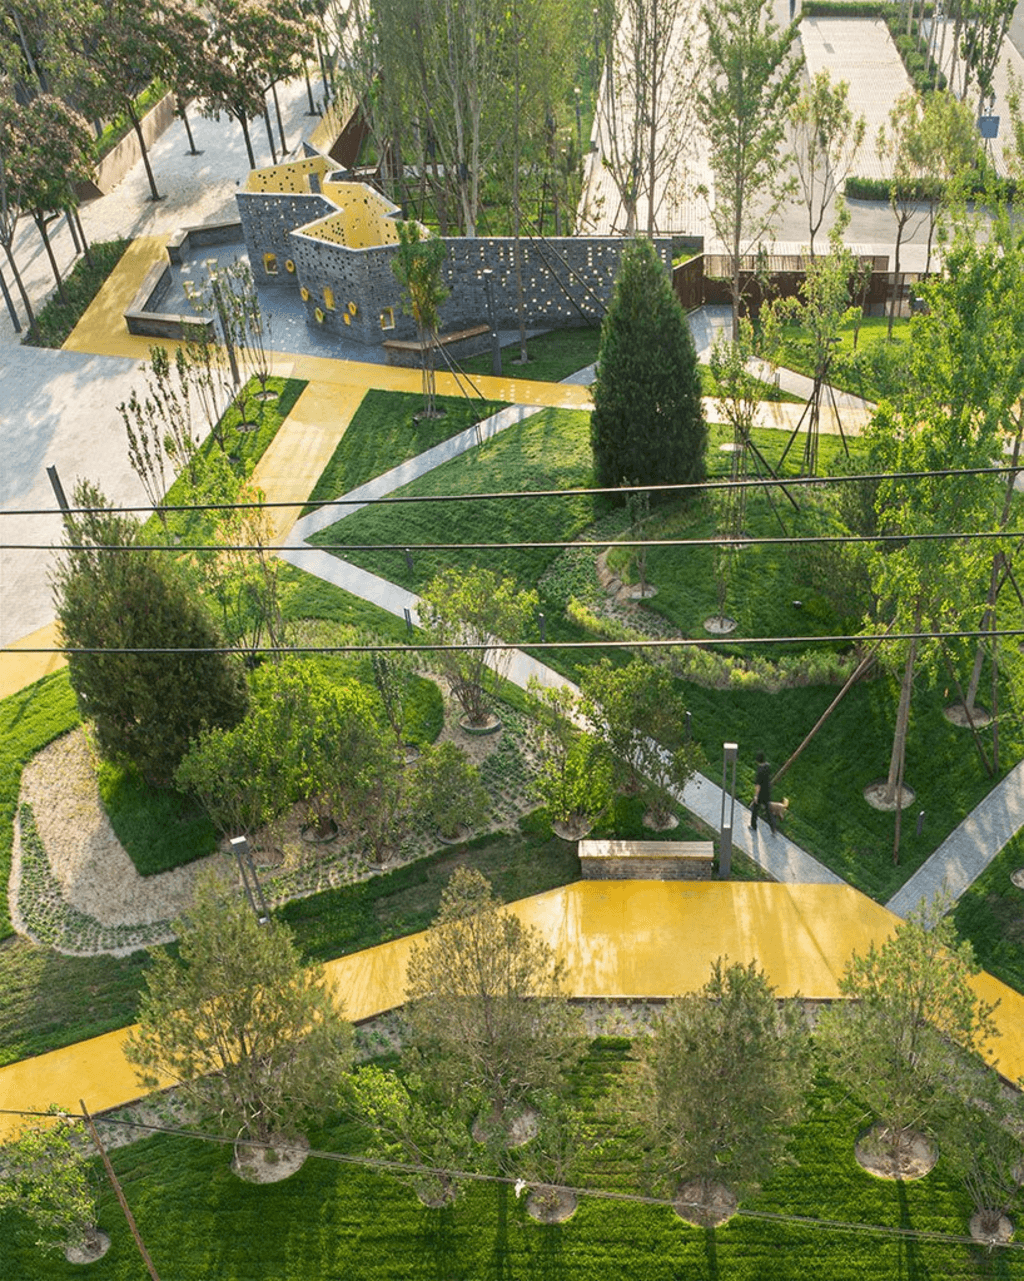 arial view of songzhuang micro community park by crossboundaries